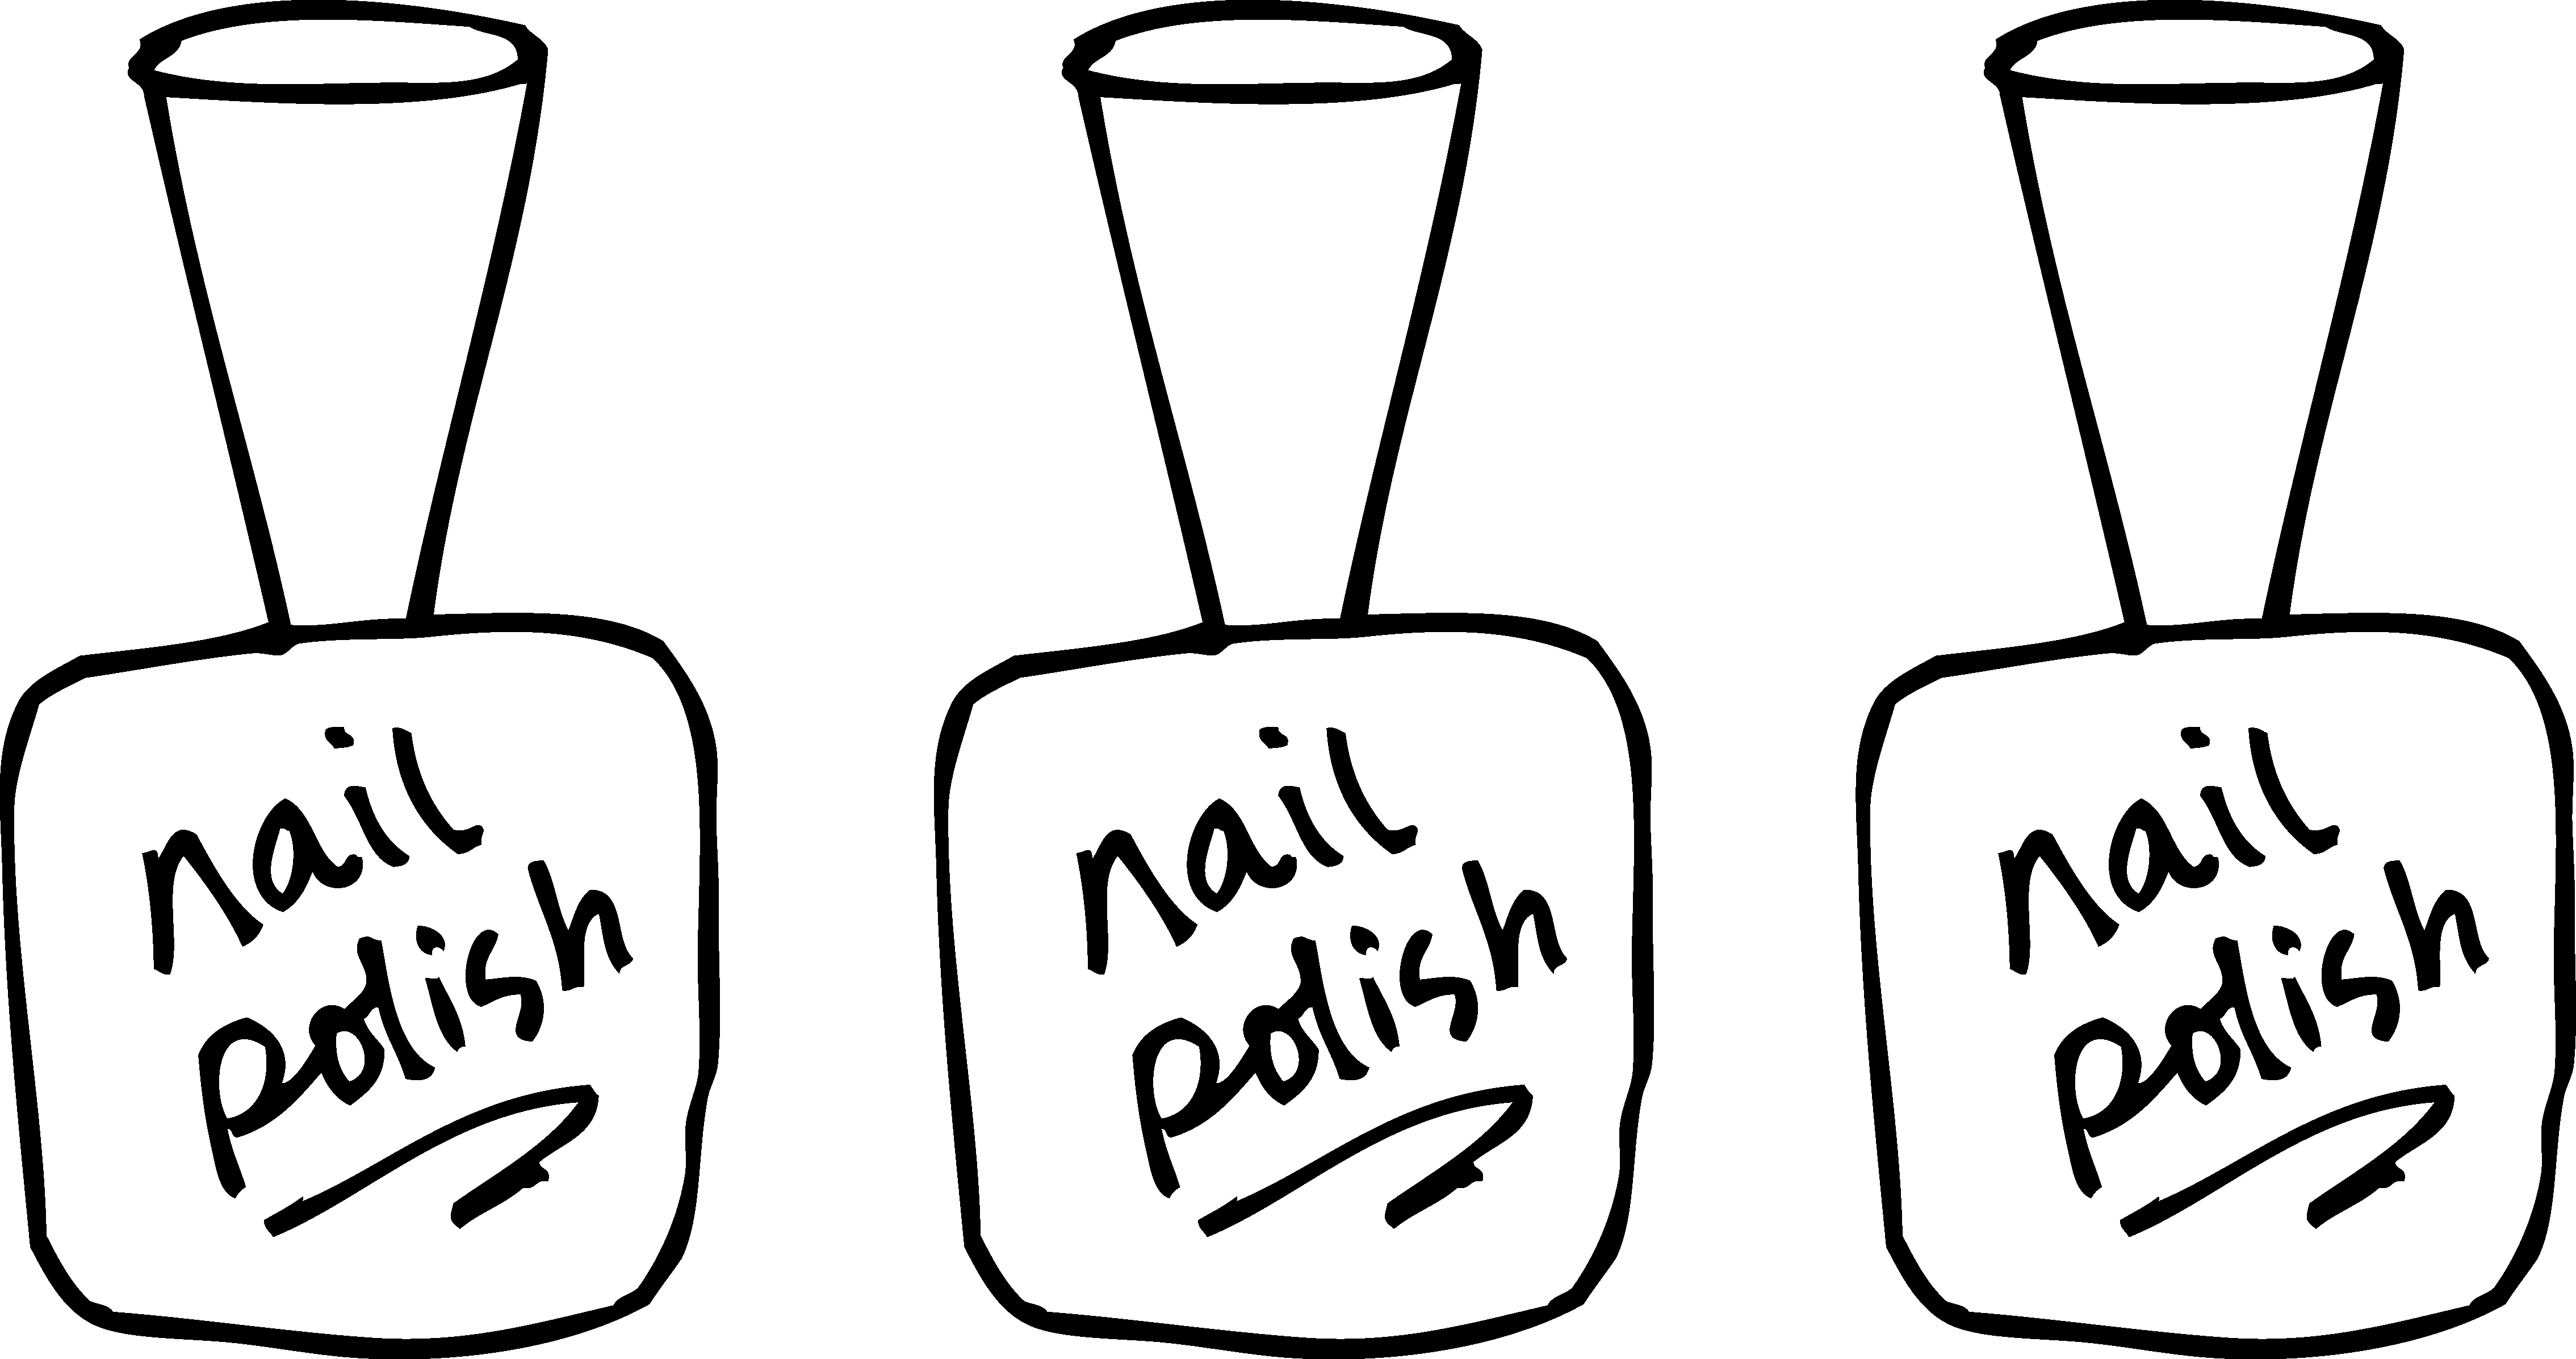 6. Nail Decal Tracing Coloring Book Set: Includes Stencils, Designs, and Coloring Pages - wide 10